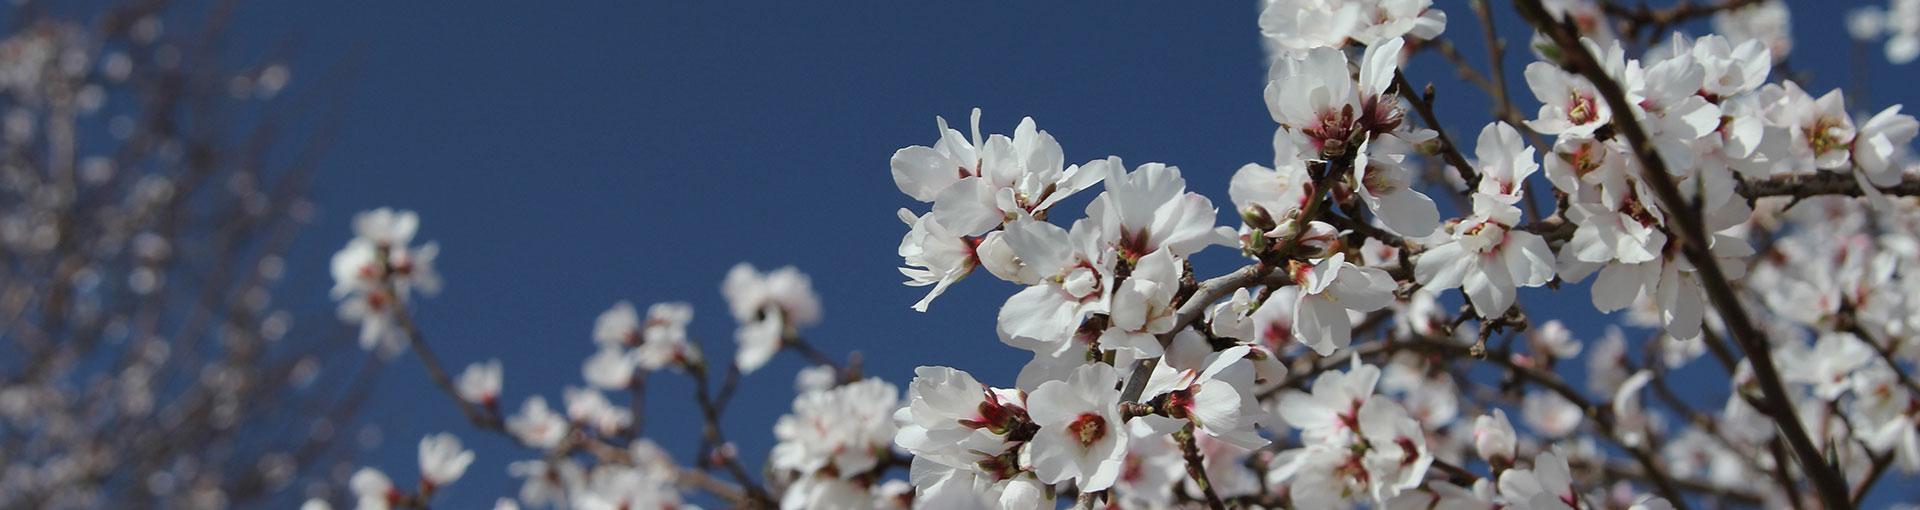 Almond Blossoms - Photo By Board of Trade